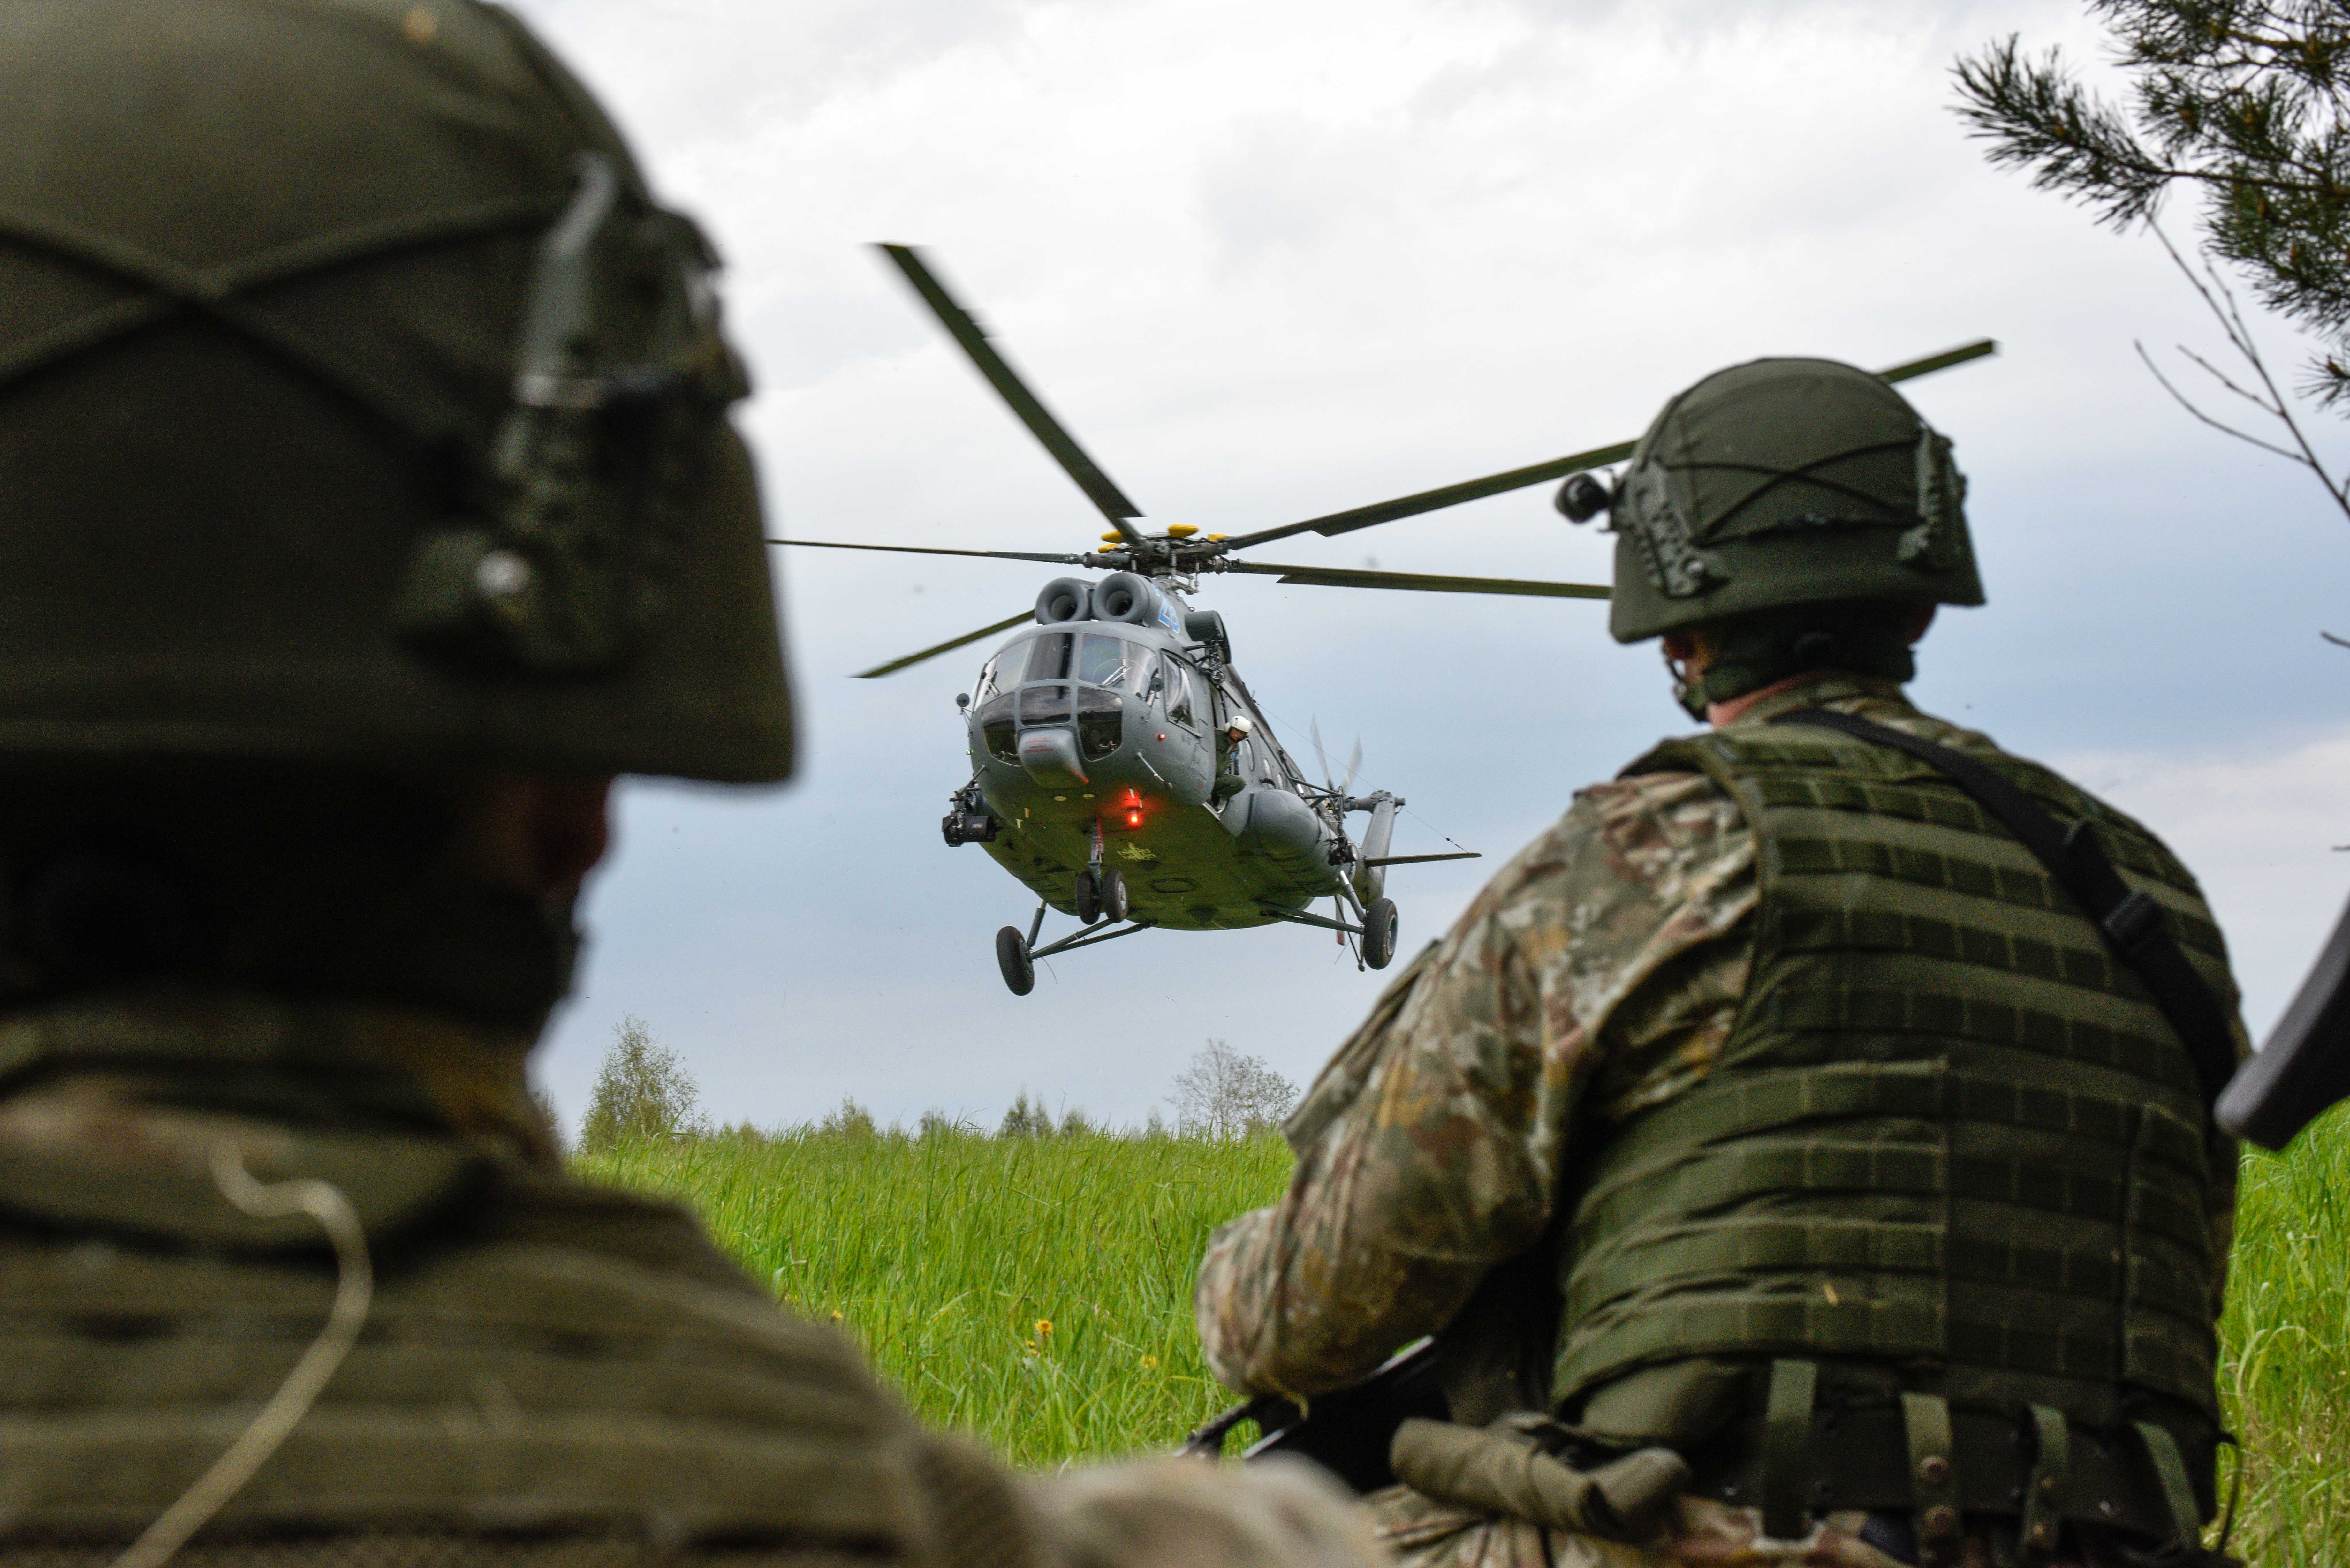 Personnel look towards helicopter landing on exercise.